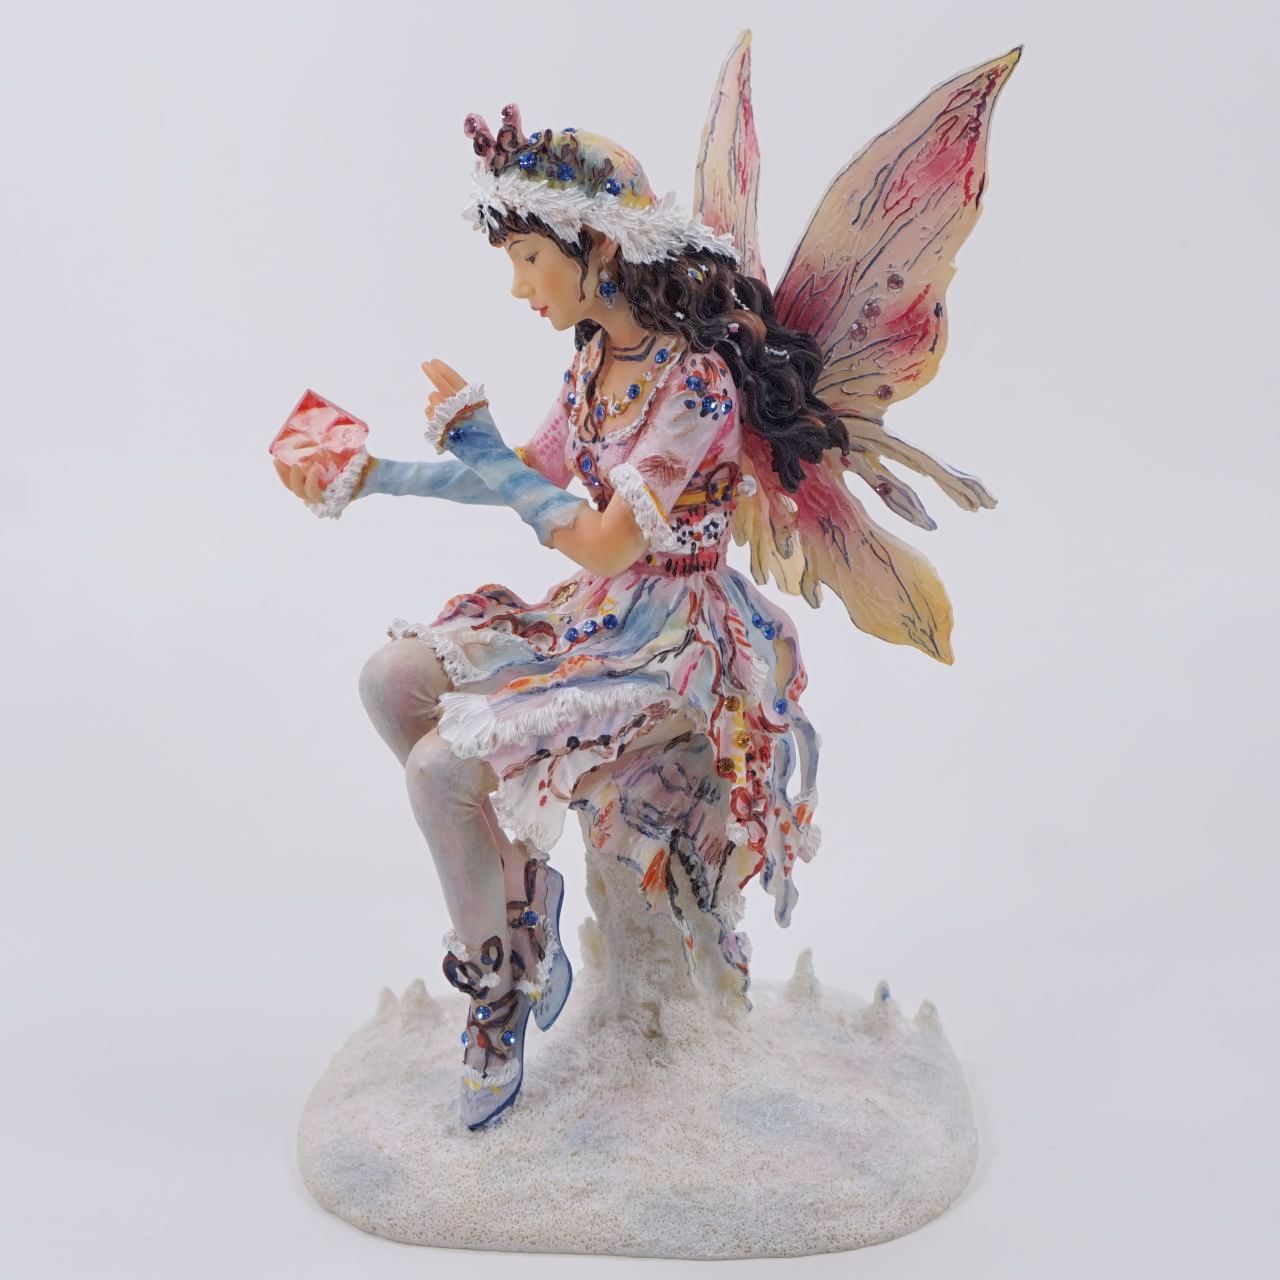 Crisalis Collection★ The Crystal Vision (1-2595) Standard